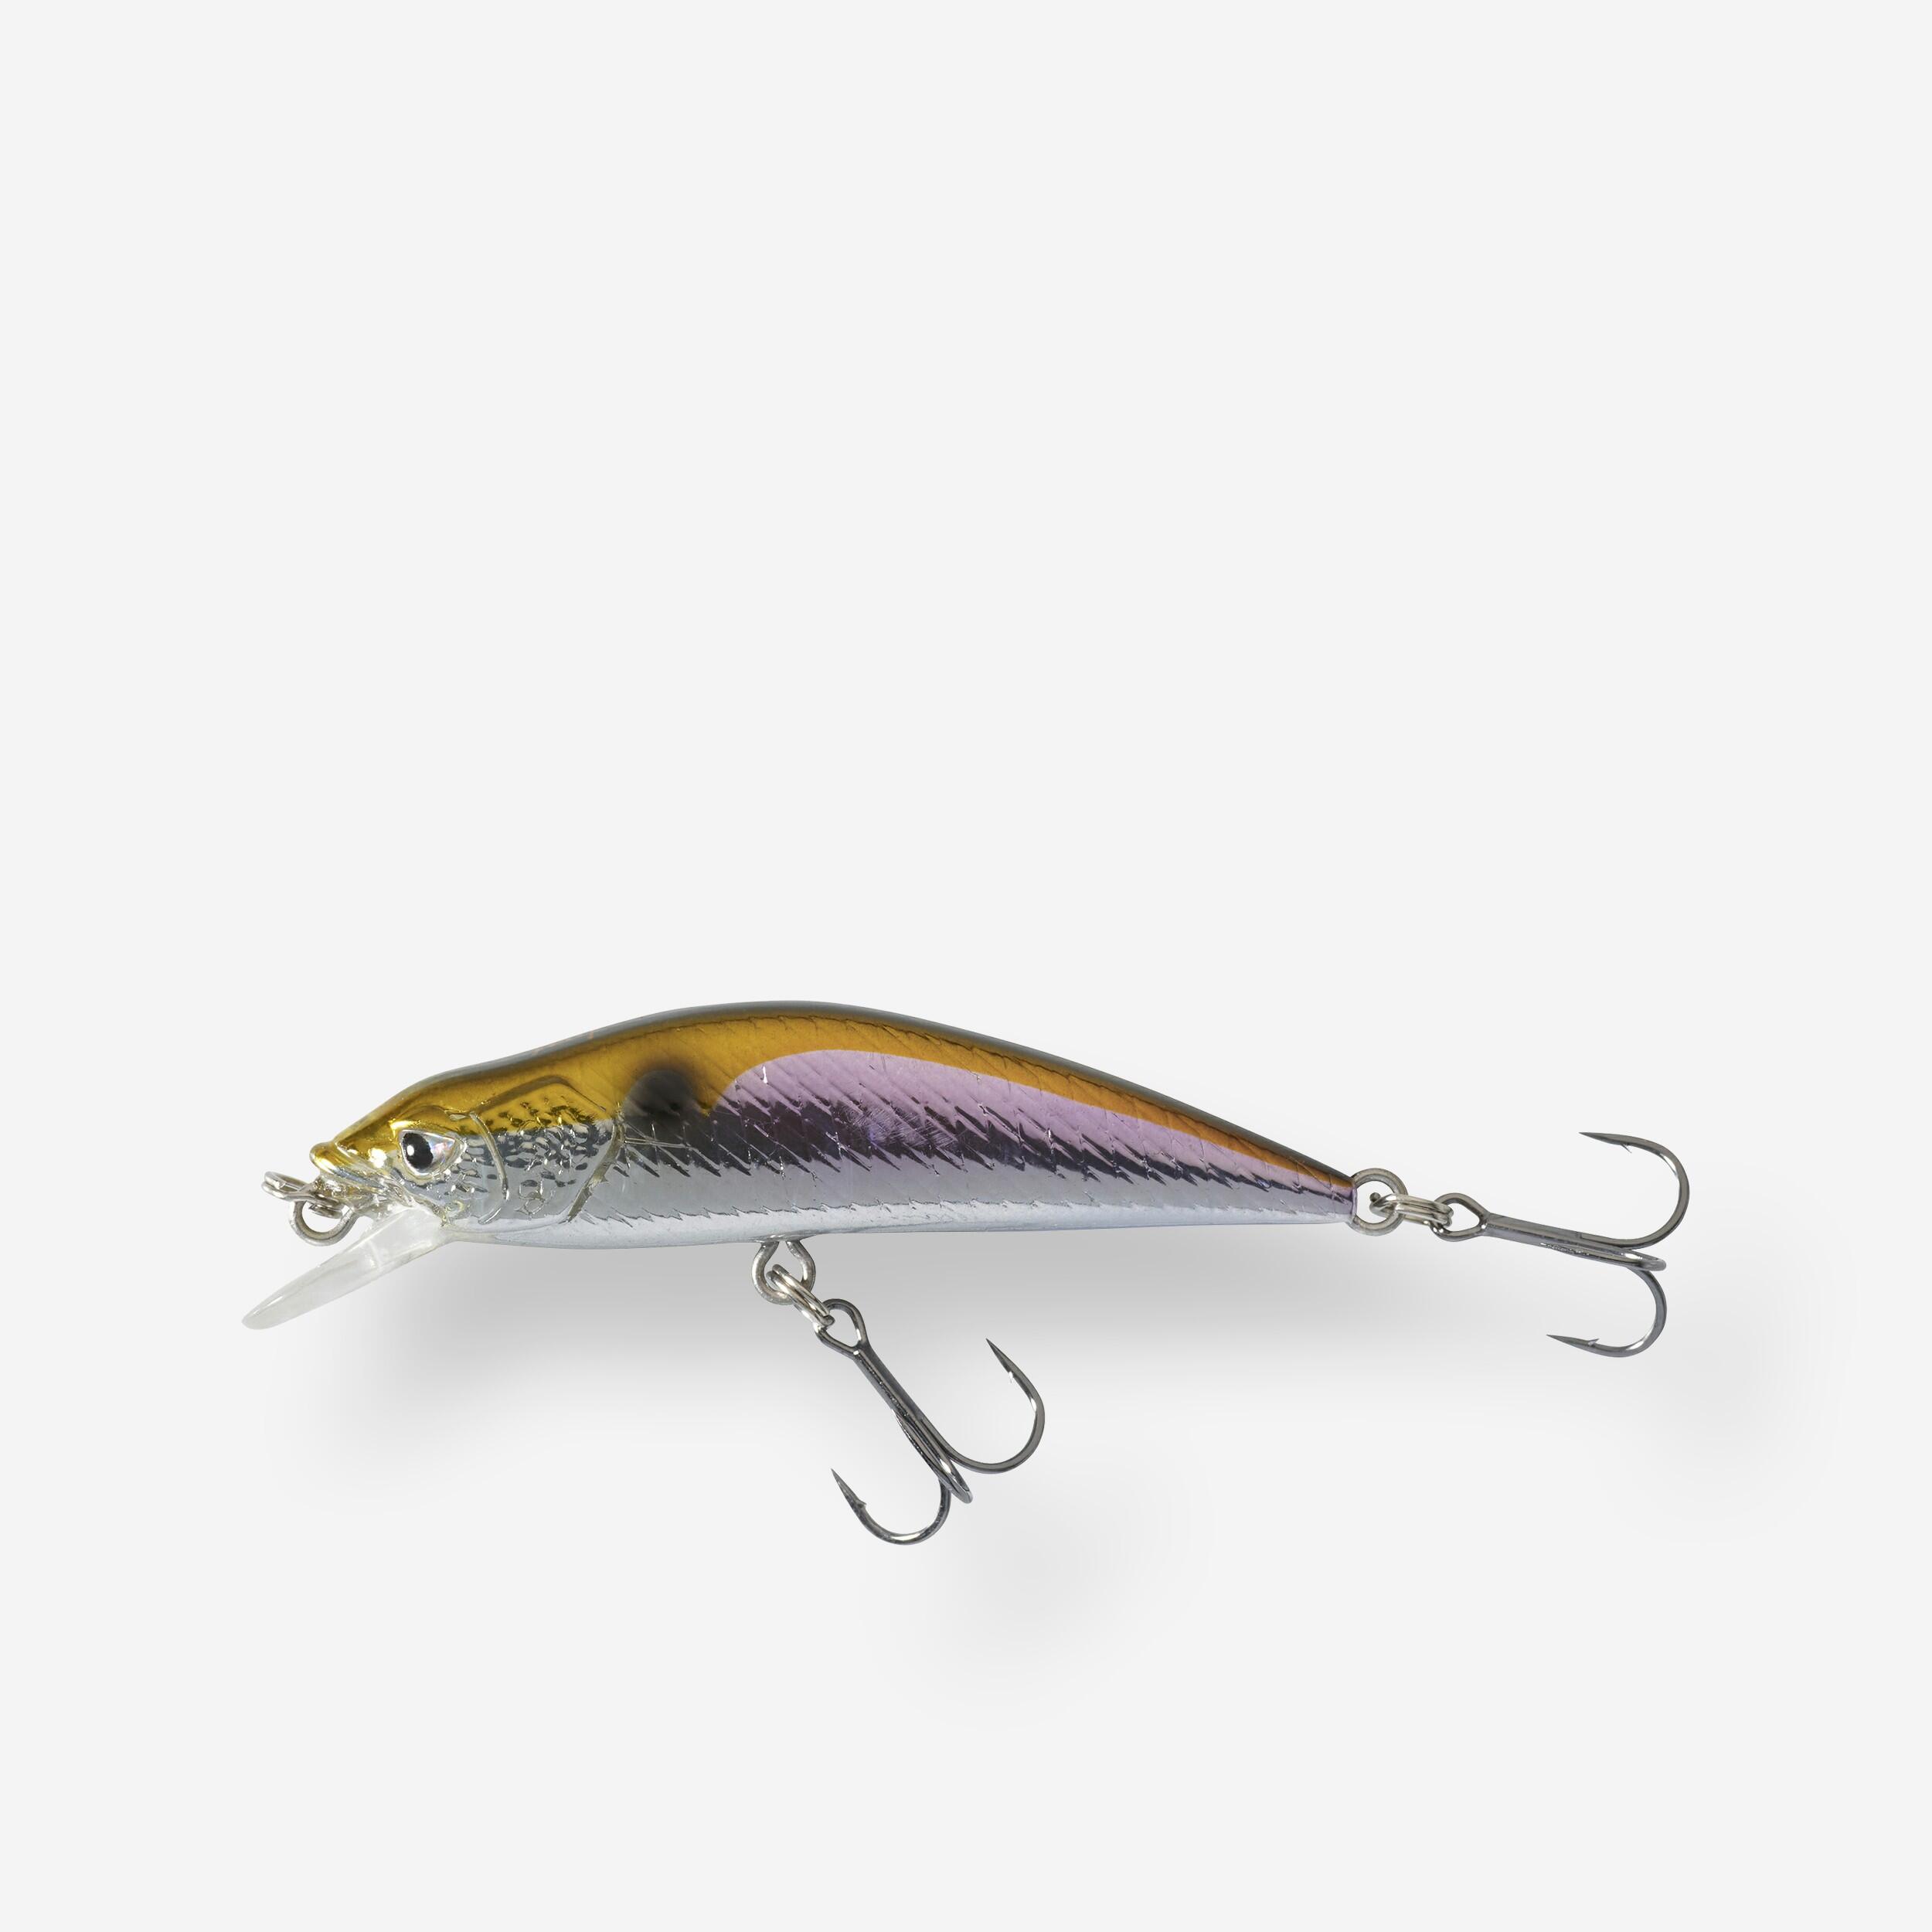 CAPERLAN MINNOW HARD LURE FOR TROUT WXM  MNWFS US 50 FRY